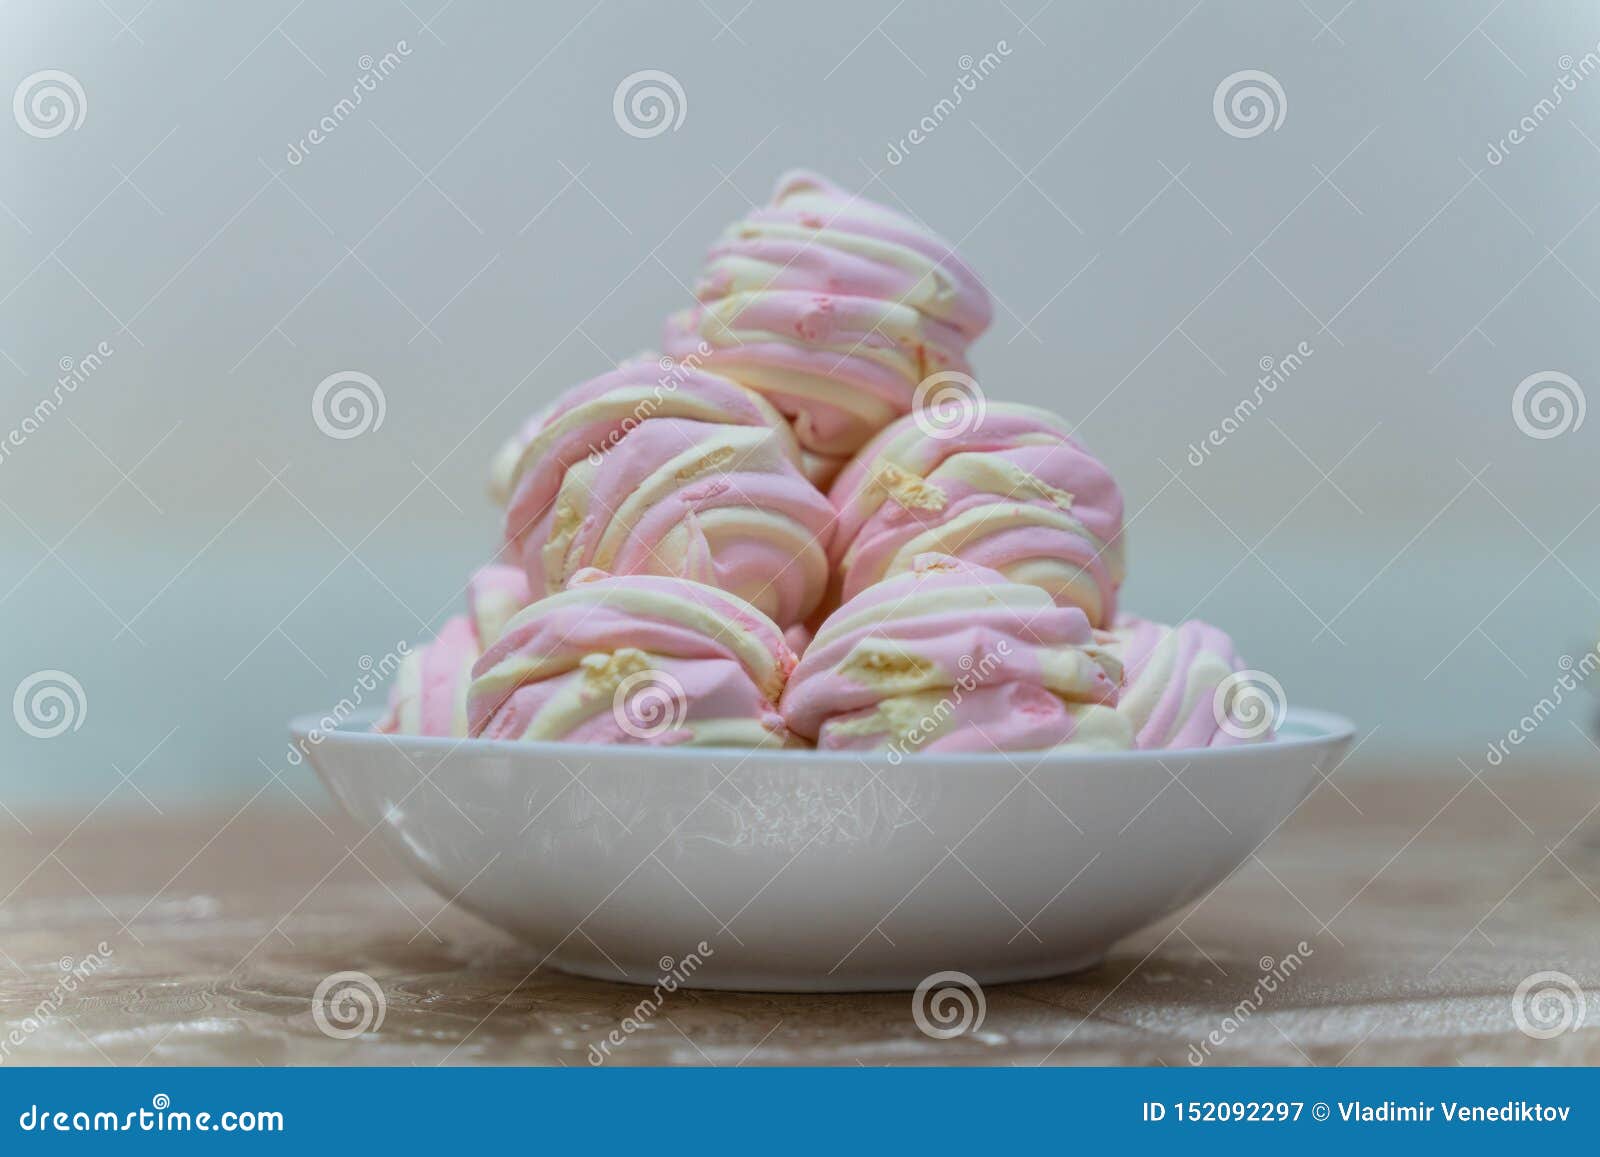 Delicate White-pink Marshmallow . White Plate with Marshmallows on the  Table Stock Image - Image of french, cooking: 152092297